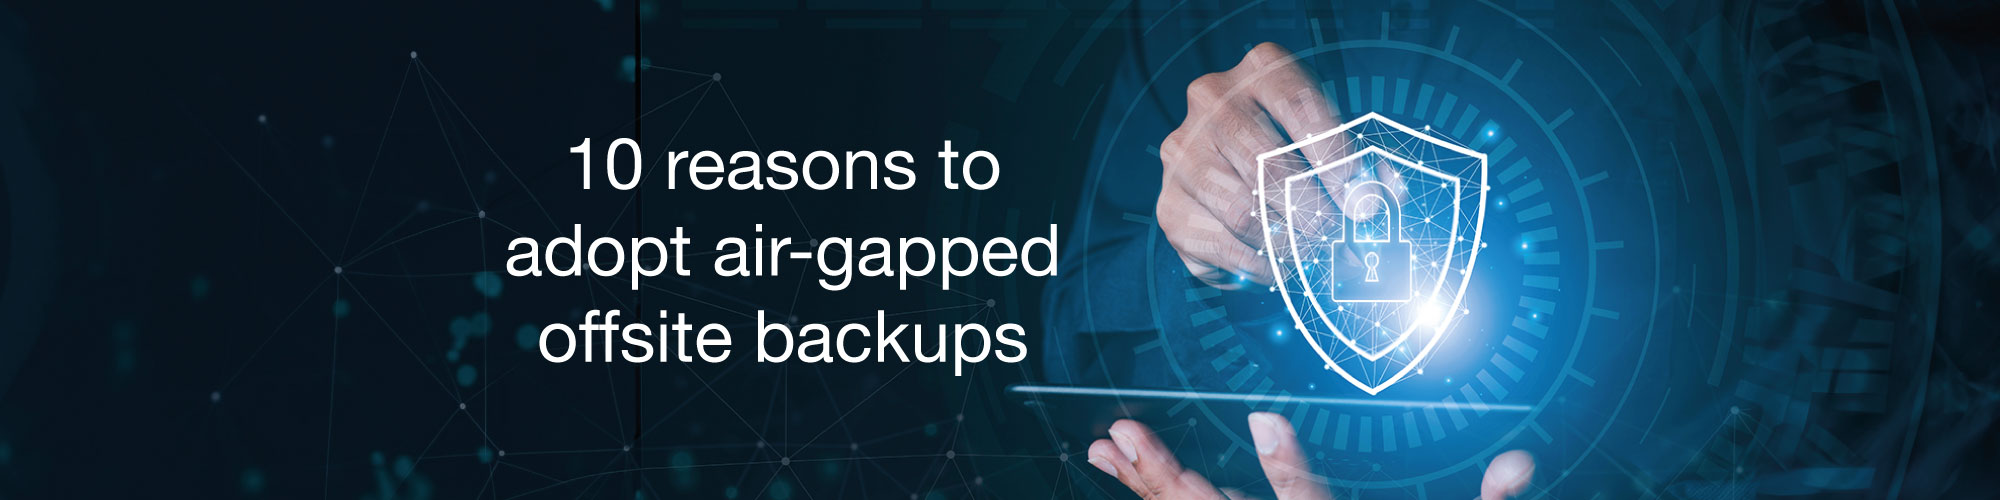 10-Reasons-for-Air-Gapped-Backups